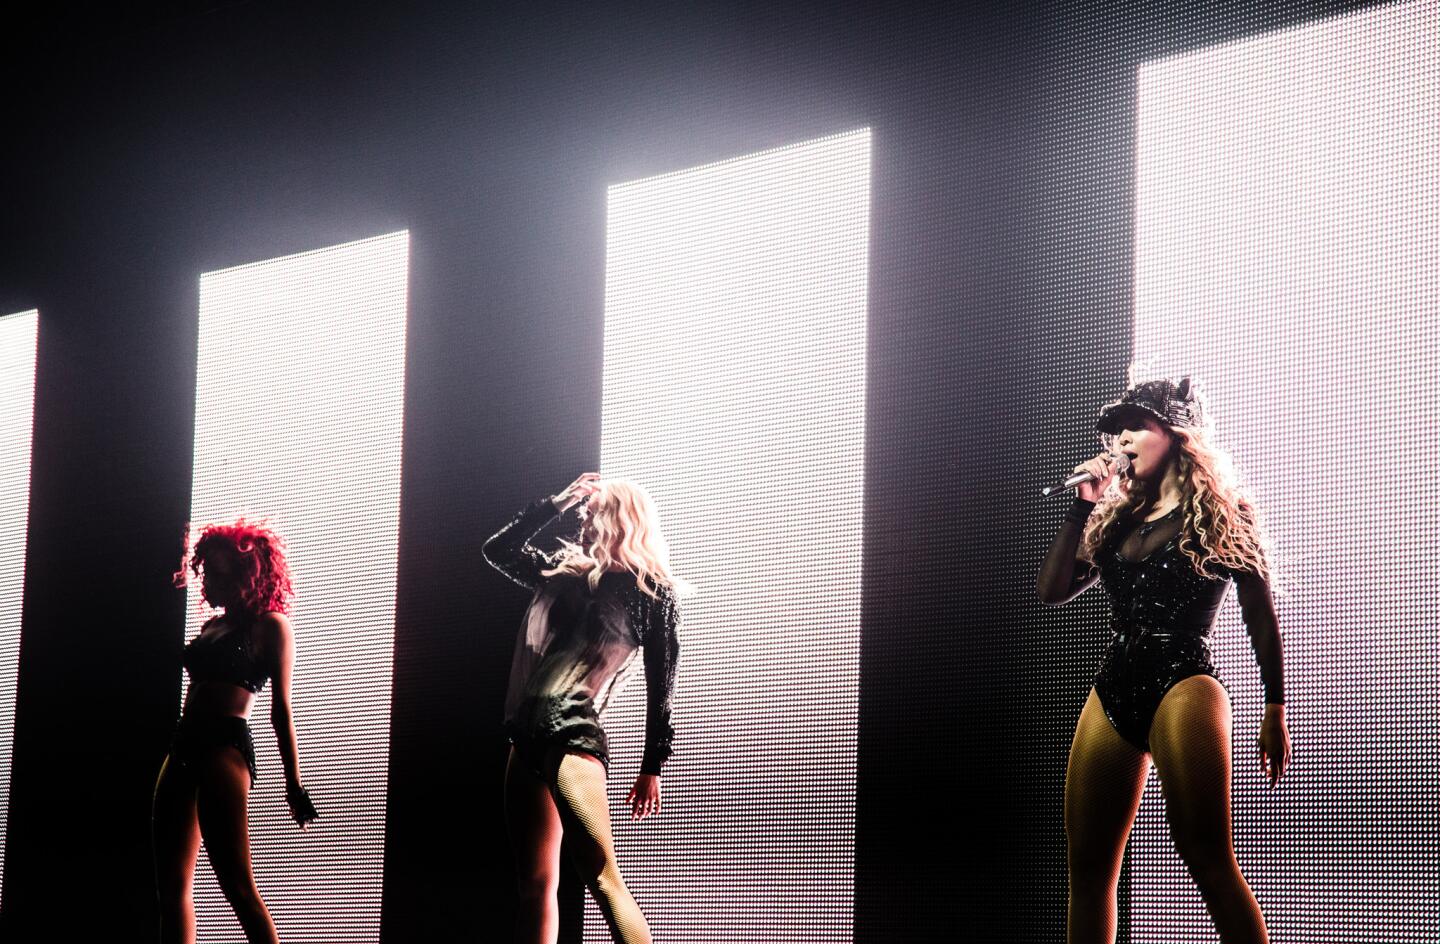 Beyonce, right, performs at the BB&T Center in Fort Lauderdale, Fla., during her "Mrs. Carter Show World Tour 2013."